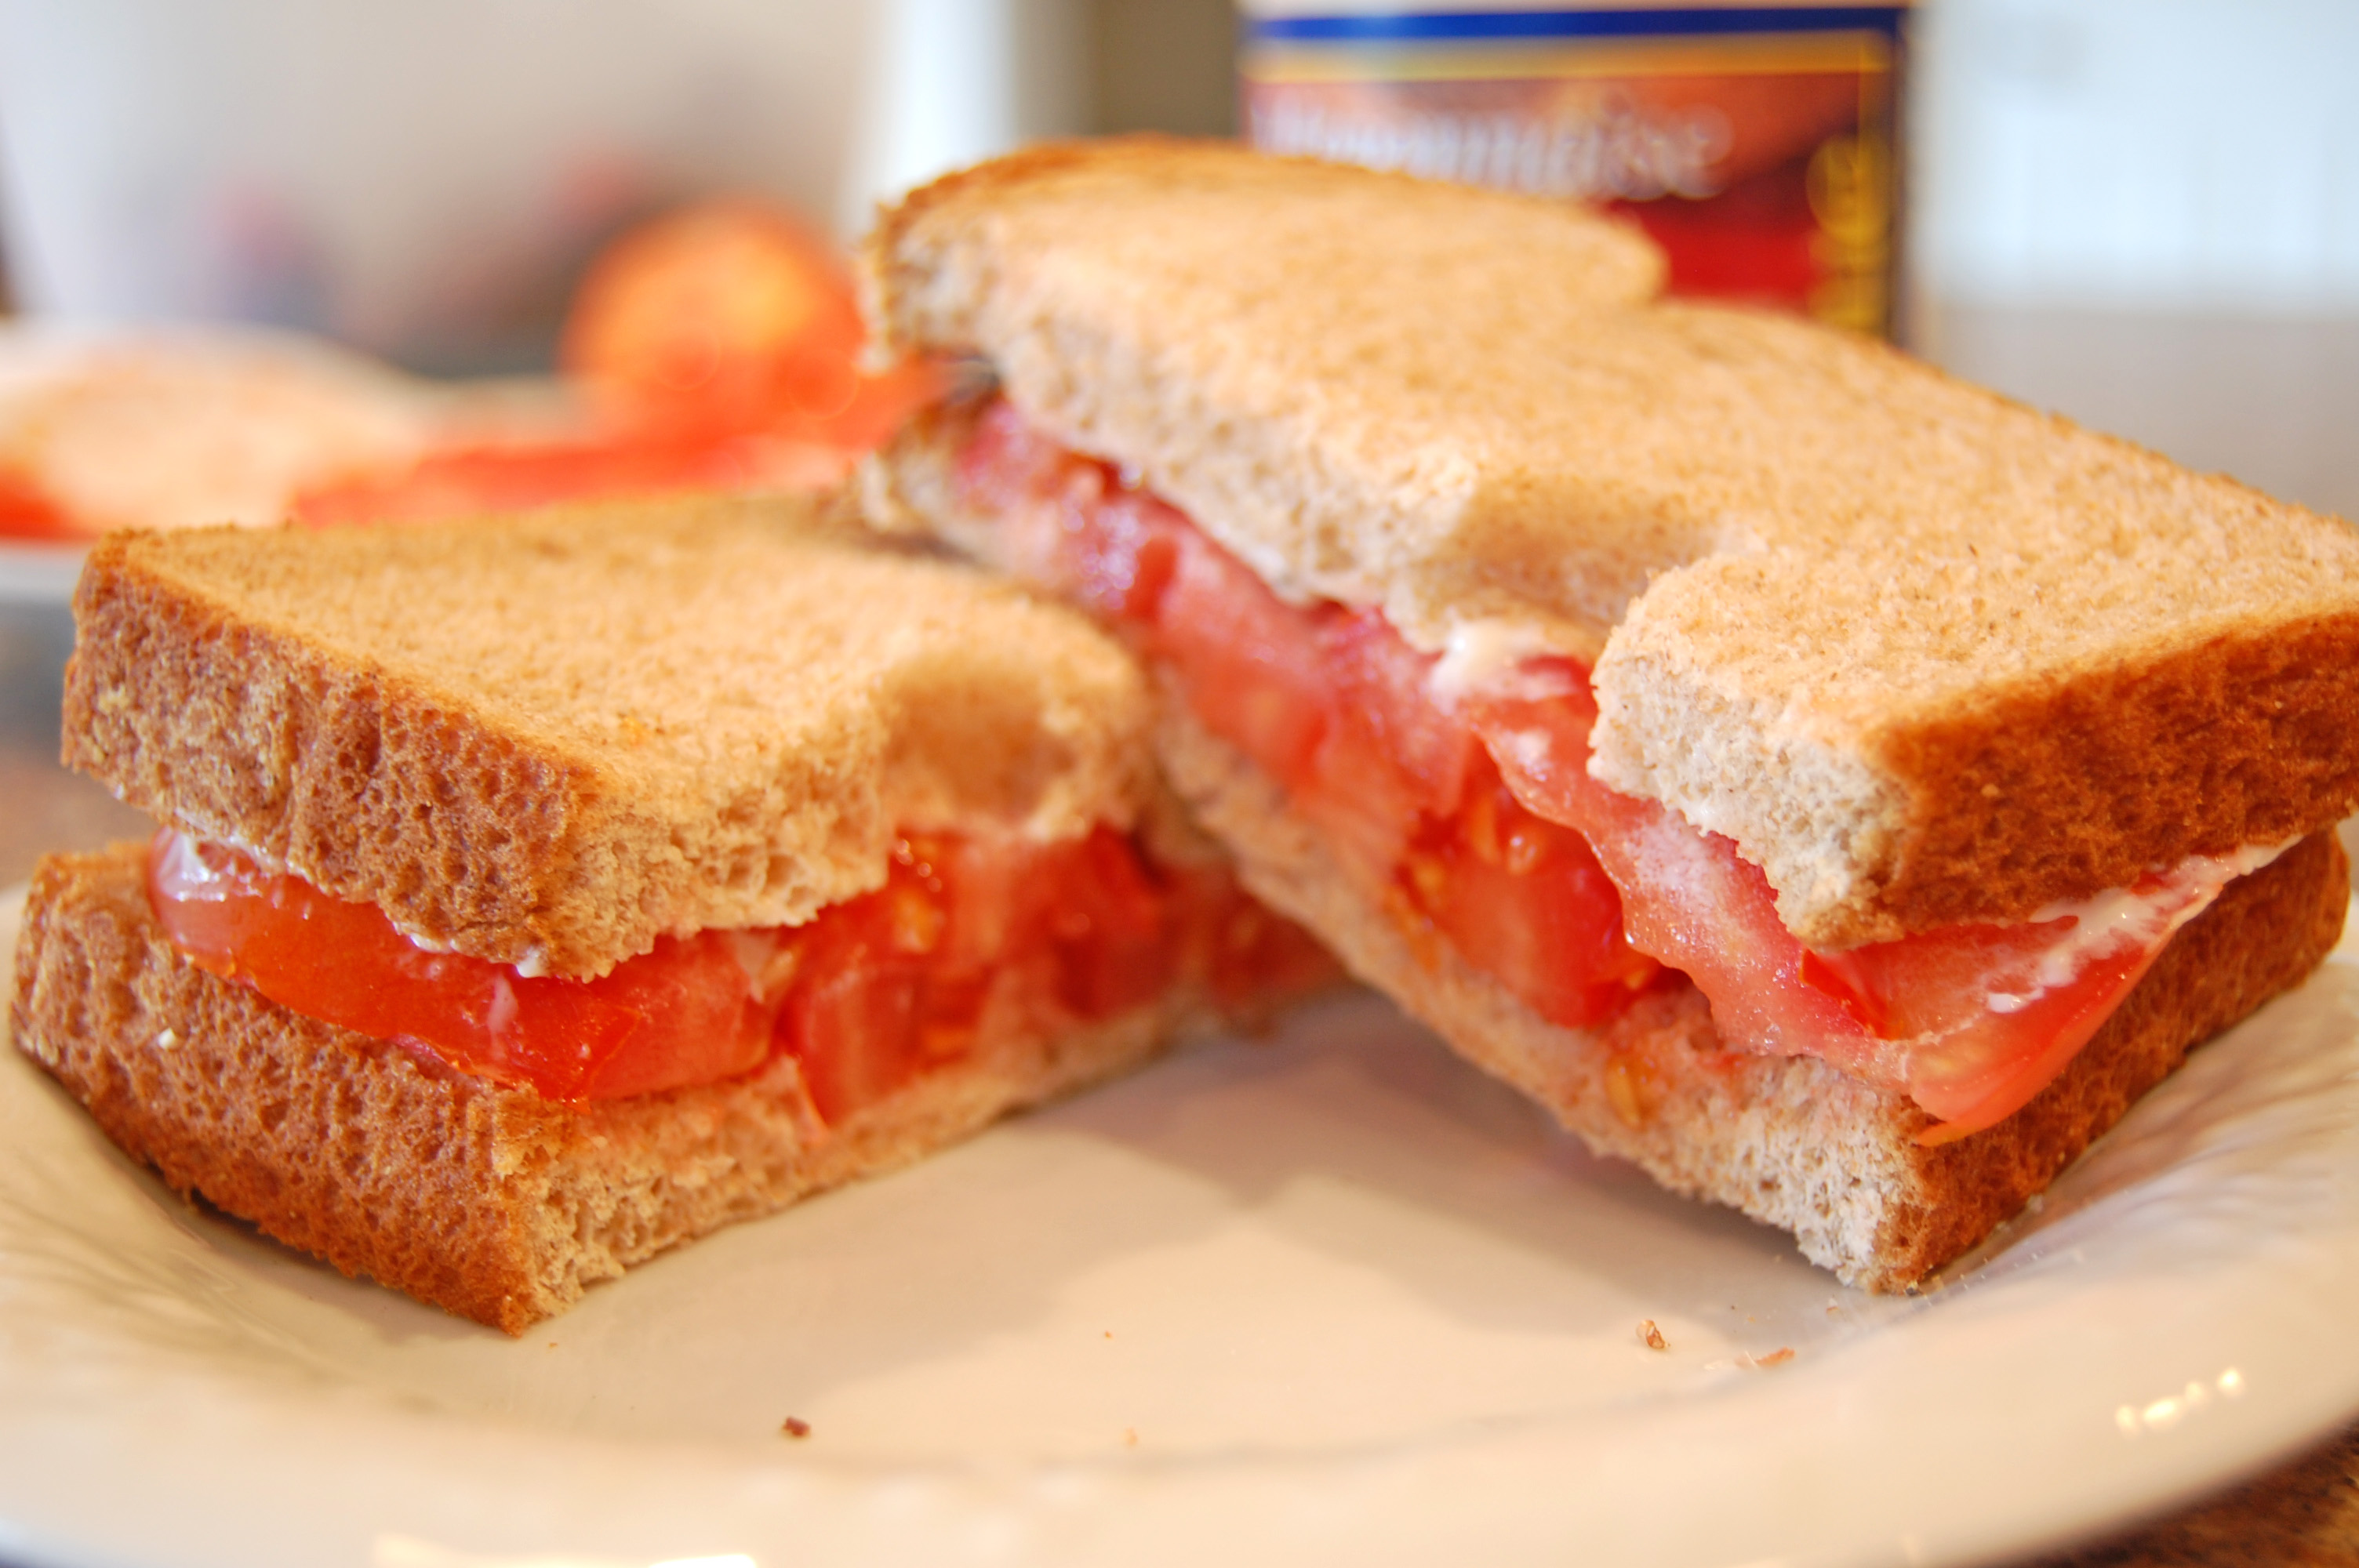 Tomato Sandwich - Eat at Home